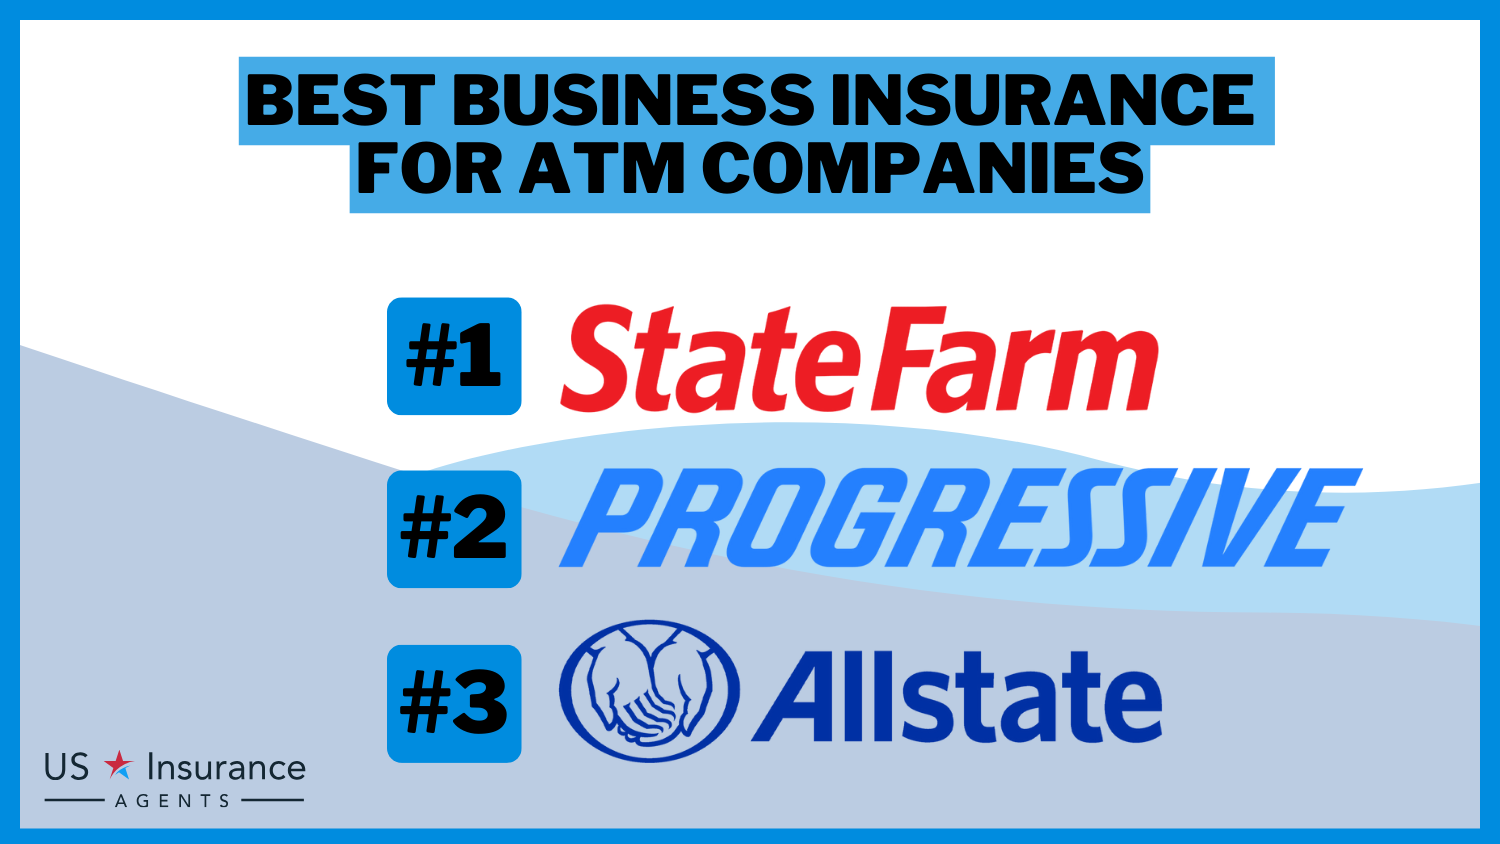 Best Business Insurance for ATM Companies: State Farm, Progressive and Allstate